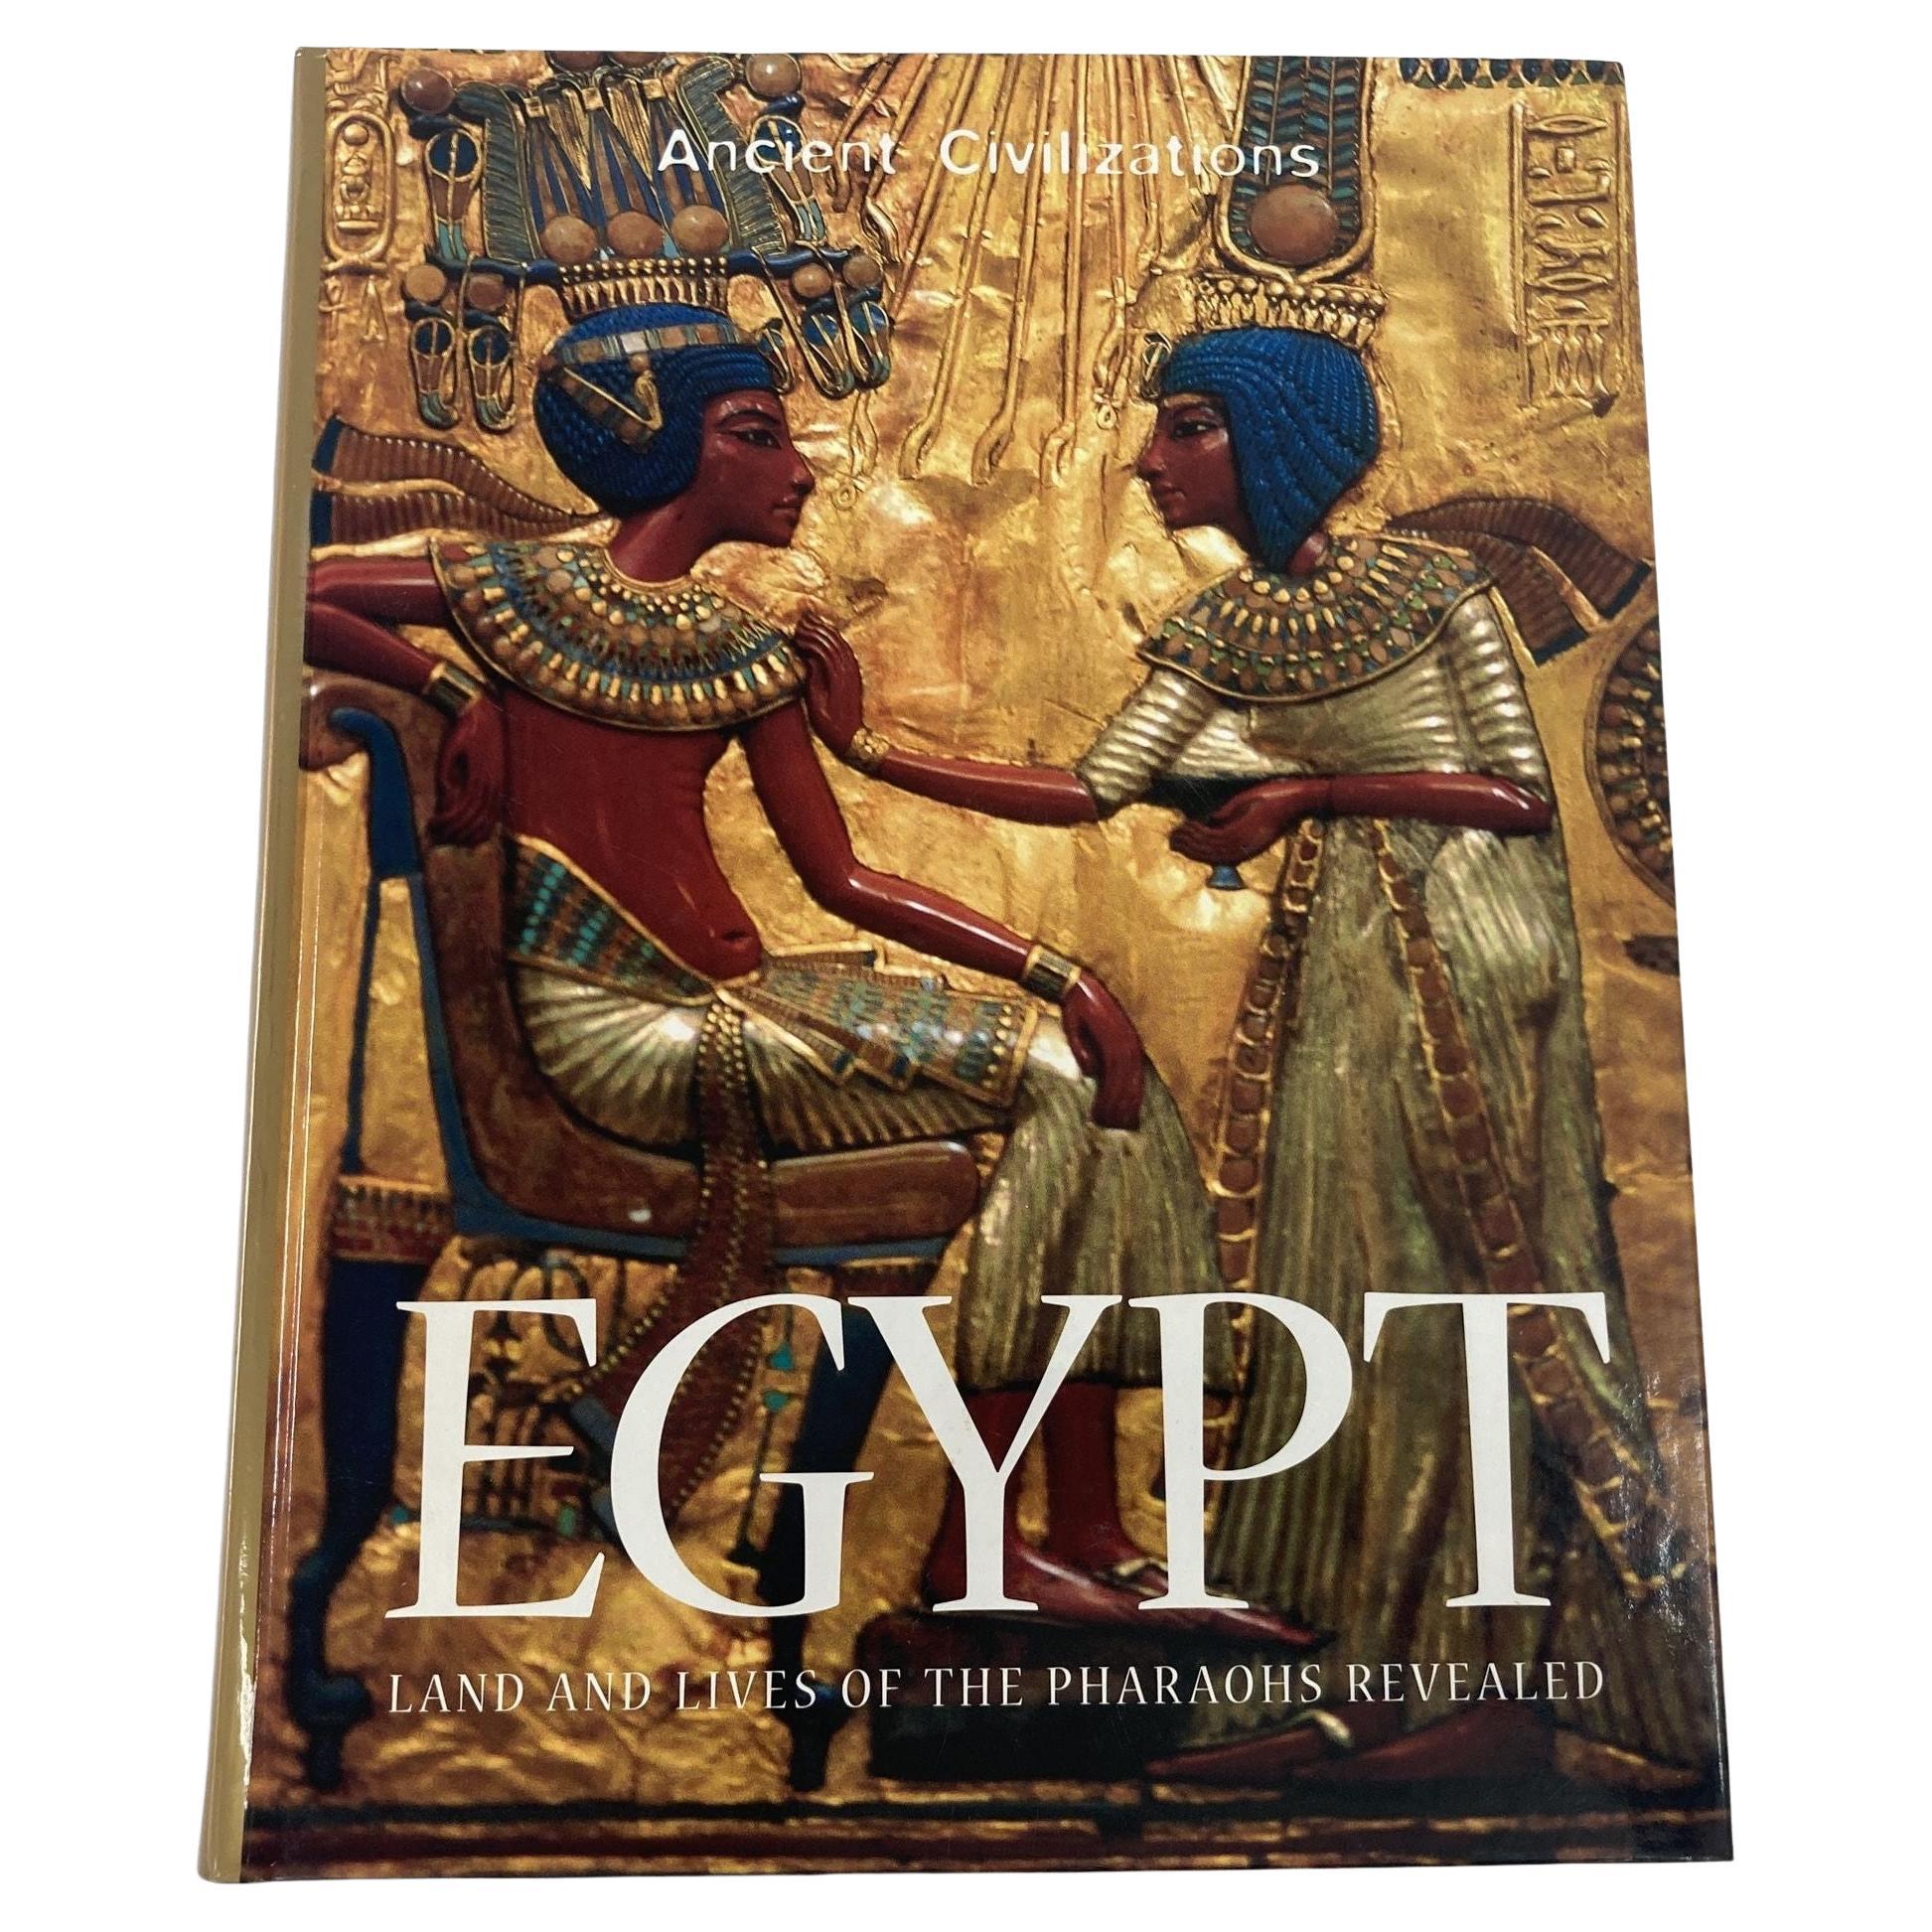 Egypt: Land and Lives of the Pharaohs Revealed Hardcover Book by Cheryl Perry For Sale